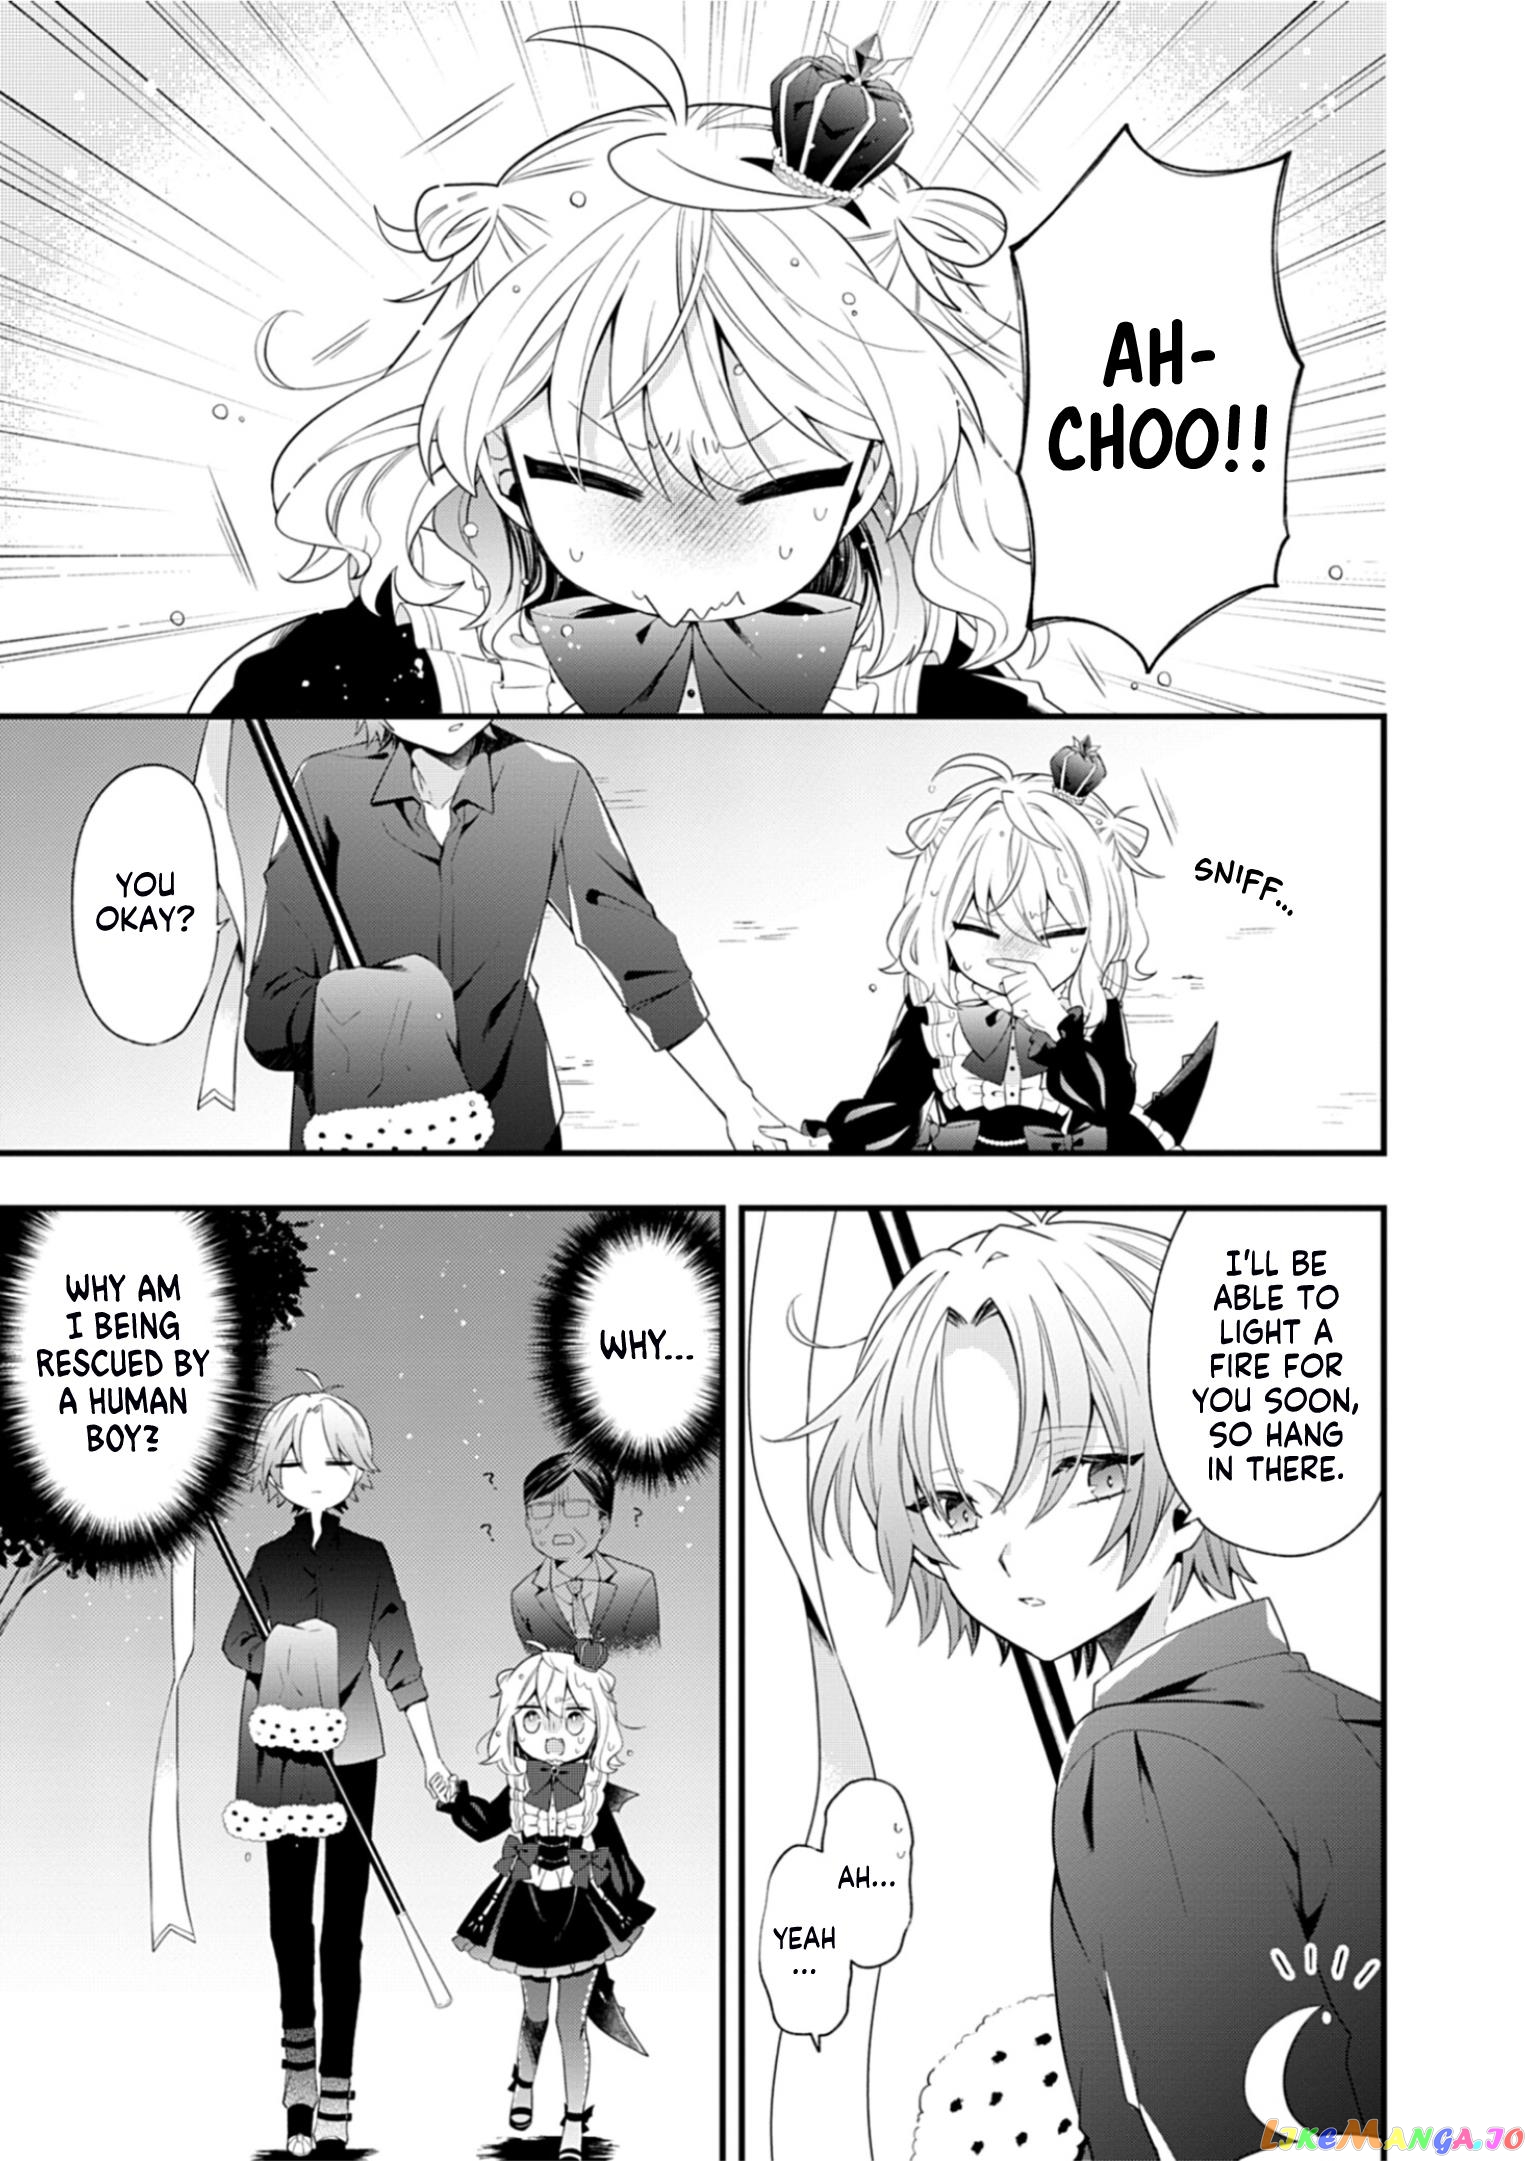 The Old Man That Was Reincarnated as a Young Girl in the Demon World Wants to Become the Demon Lord for the Sake of Peace chapter 2 - page 1